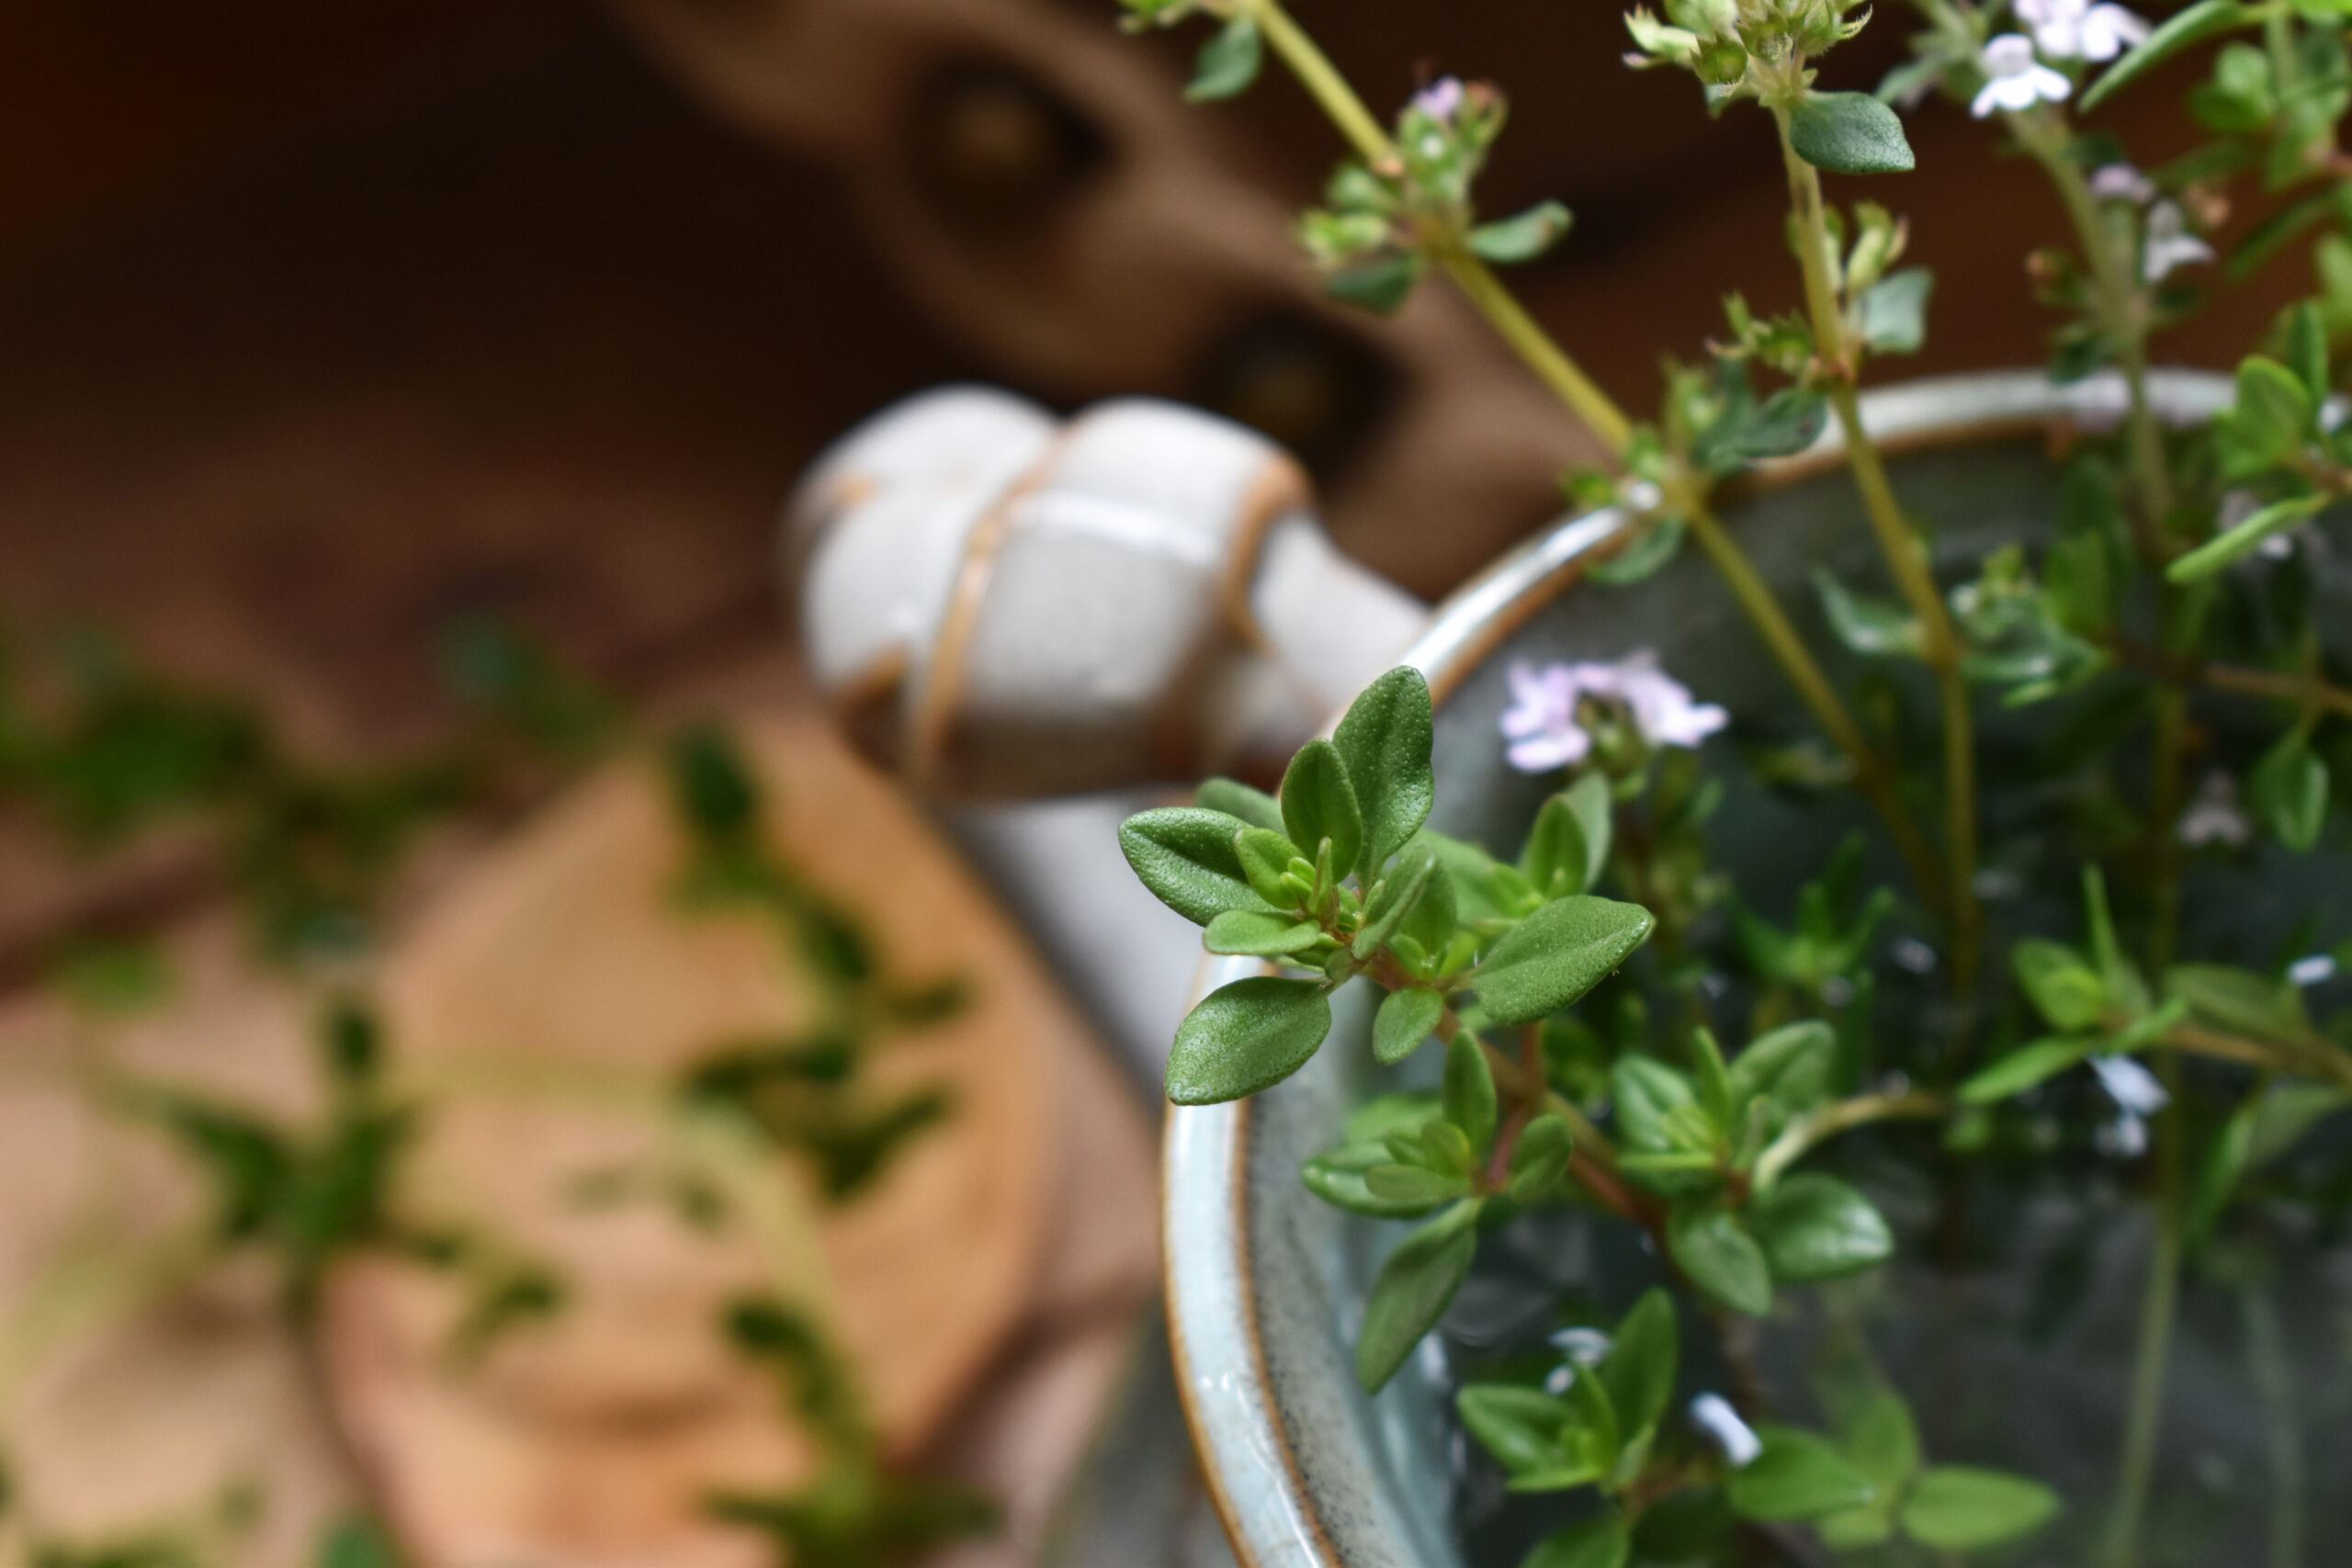 Sprigs of fresh thyme in a pottery mug